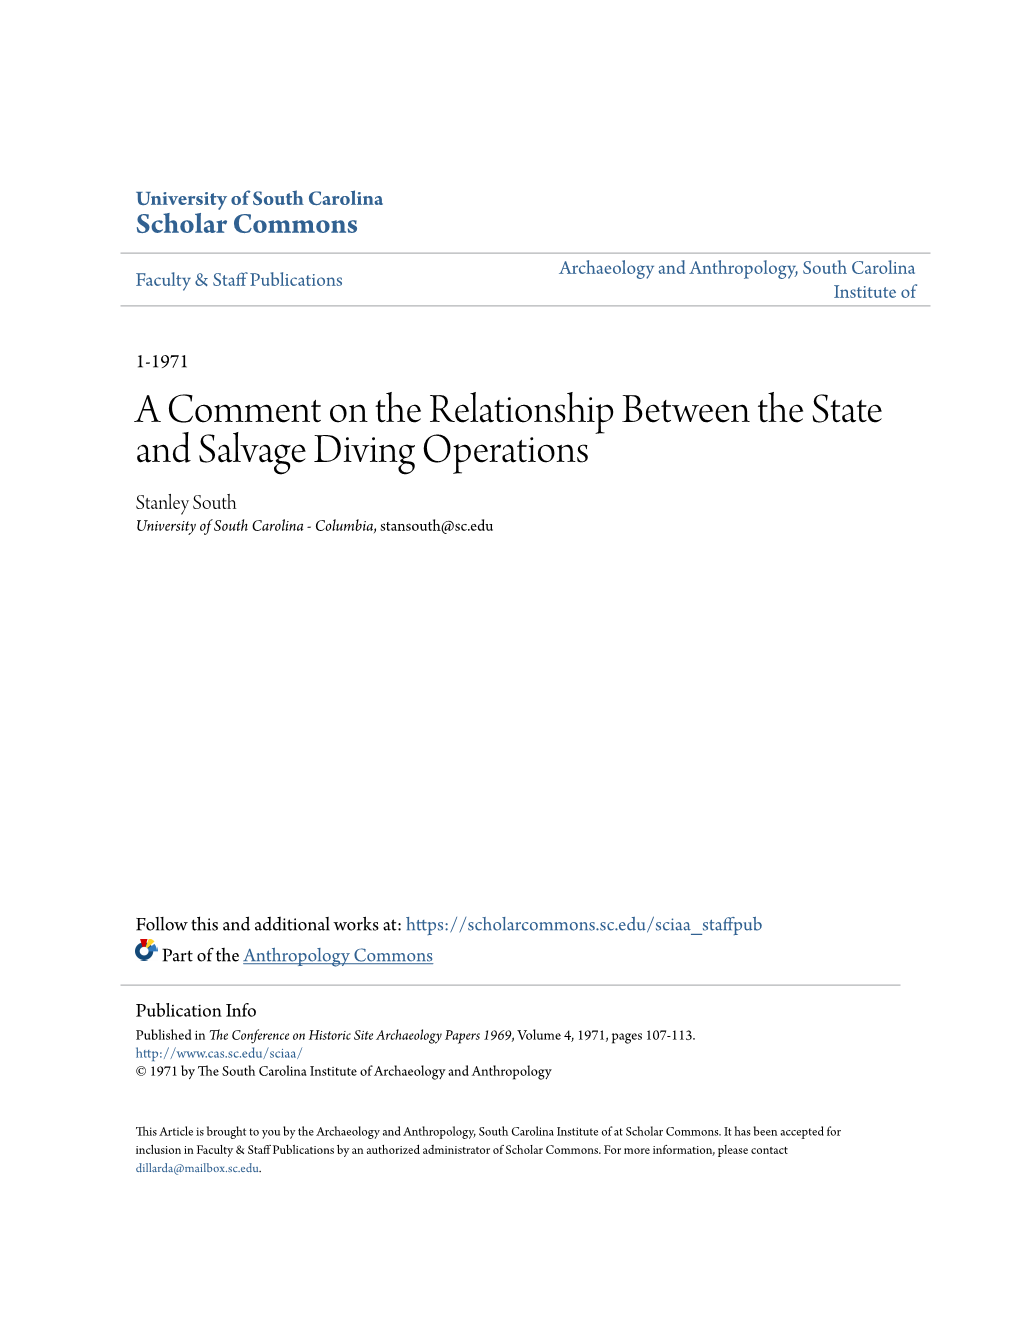 A Comment on the Relationship Between the State and Salvage Diving Operations Stanley South University of South Carolina - Columbia, Stansouth@Sc.Edu